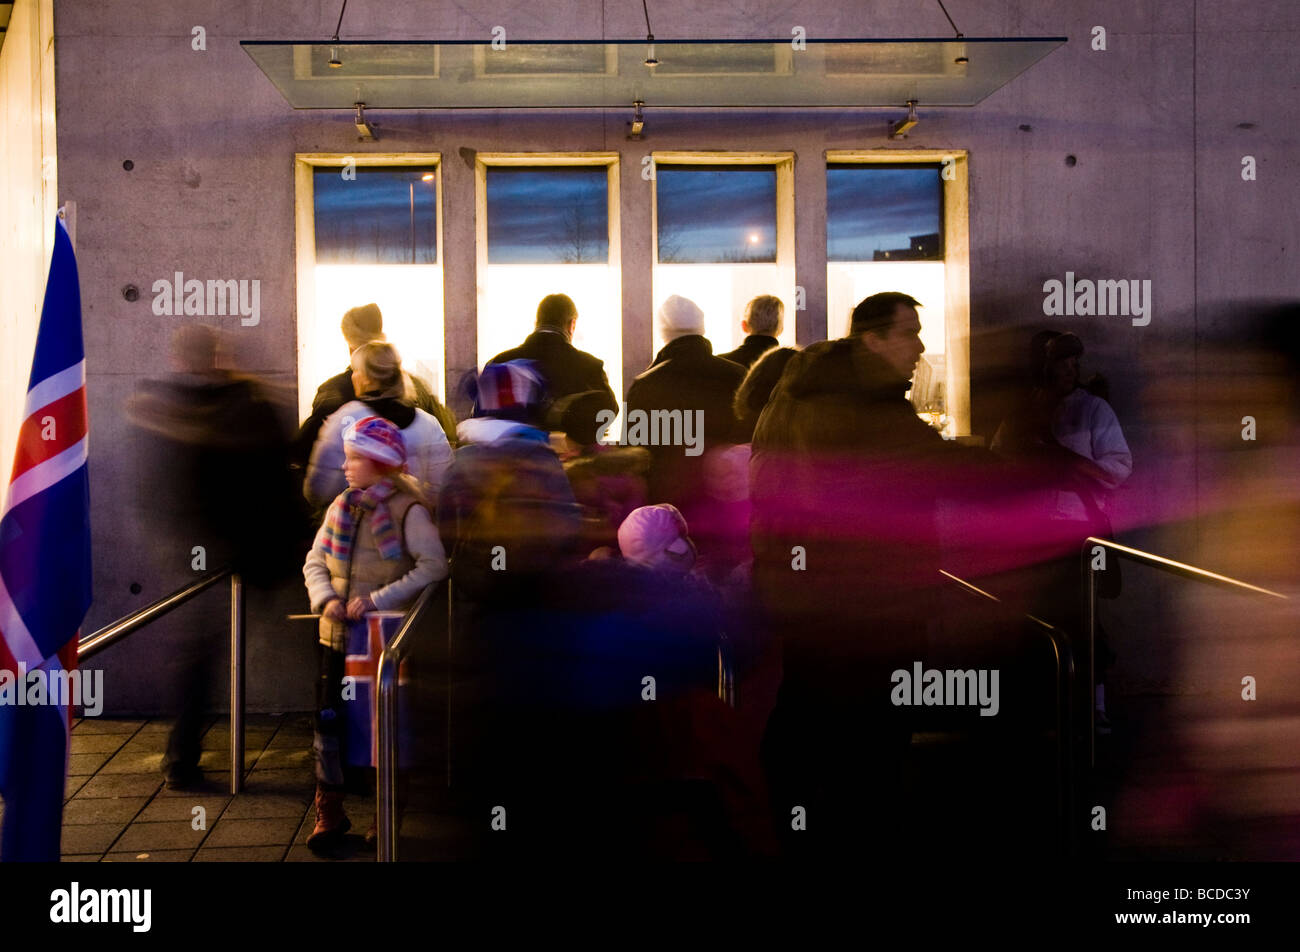 People waiting to buy tickets to a soccer match, Laugardalsvollur stadium, Laugardalur Reykjavik Iceland Stock Photo